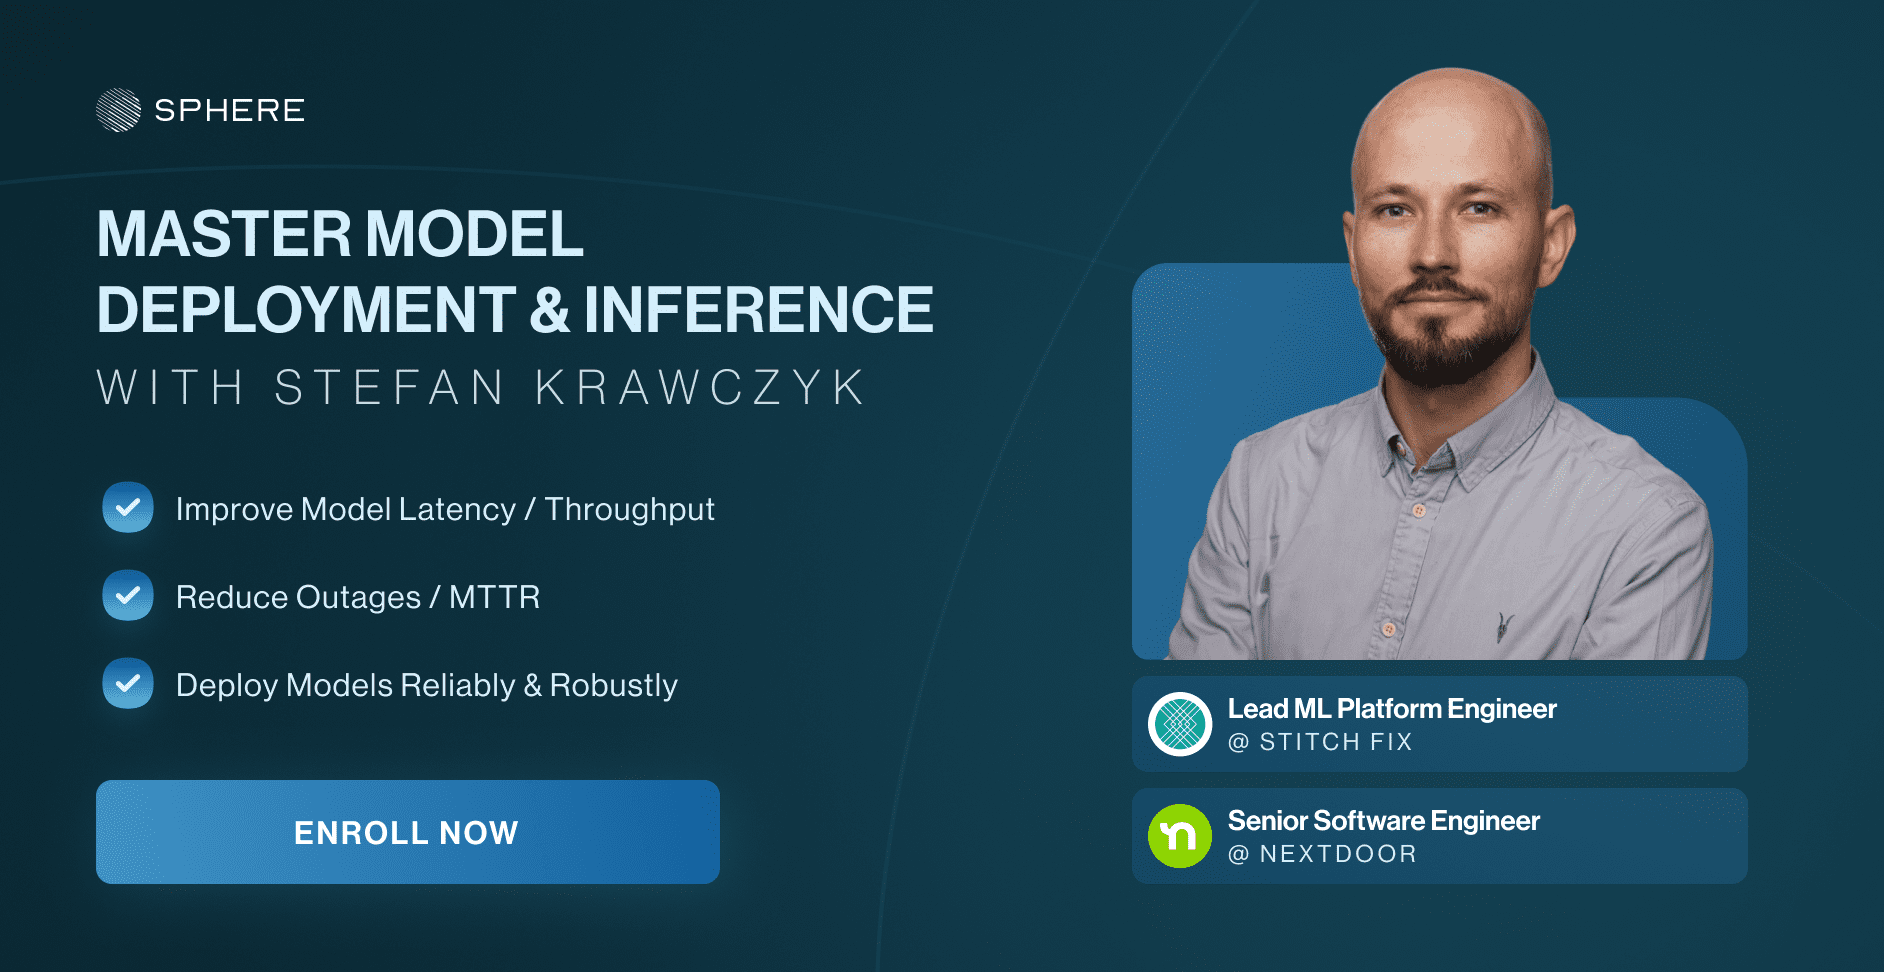 Live Model Deployment & Inference Course with Stefan Krawczyk